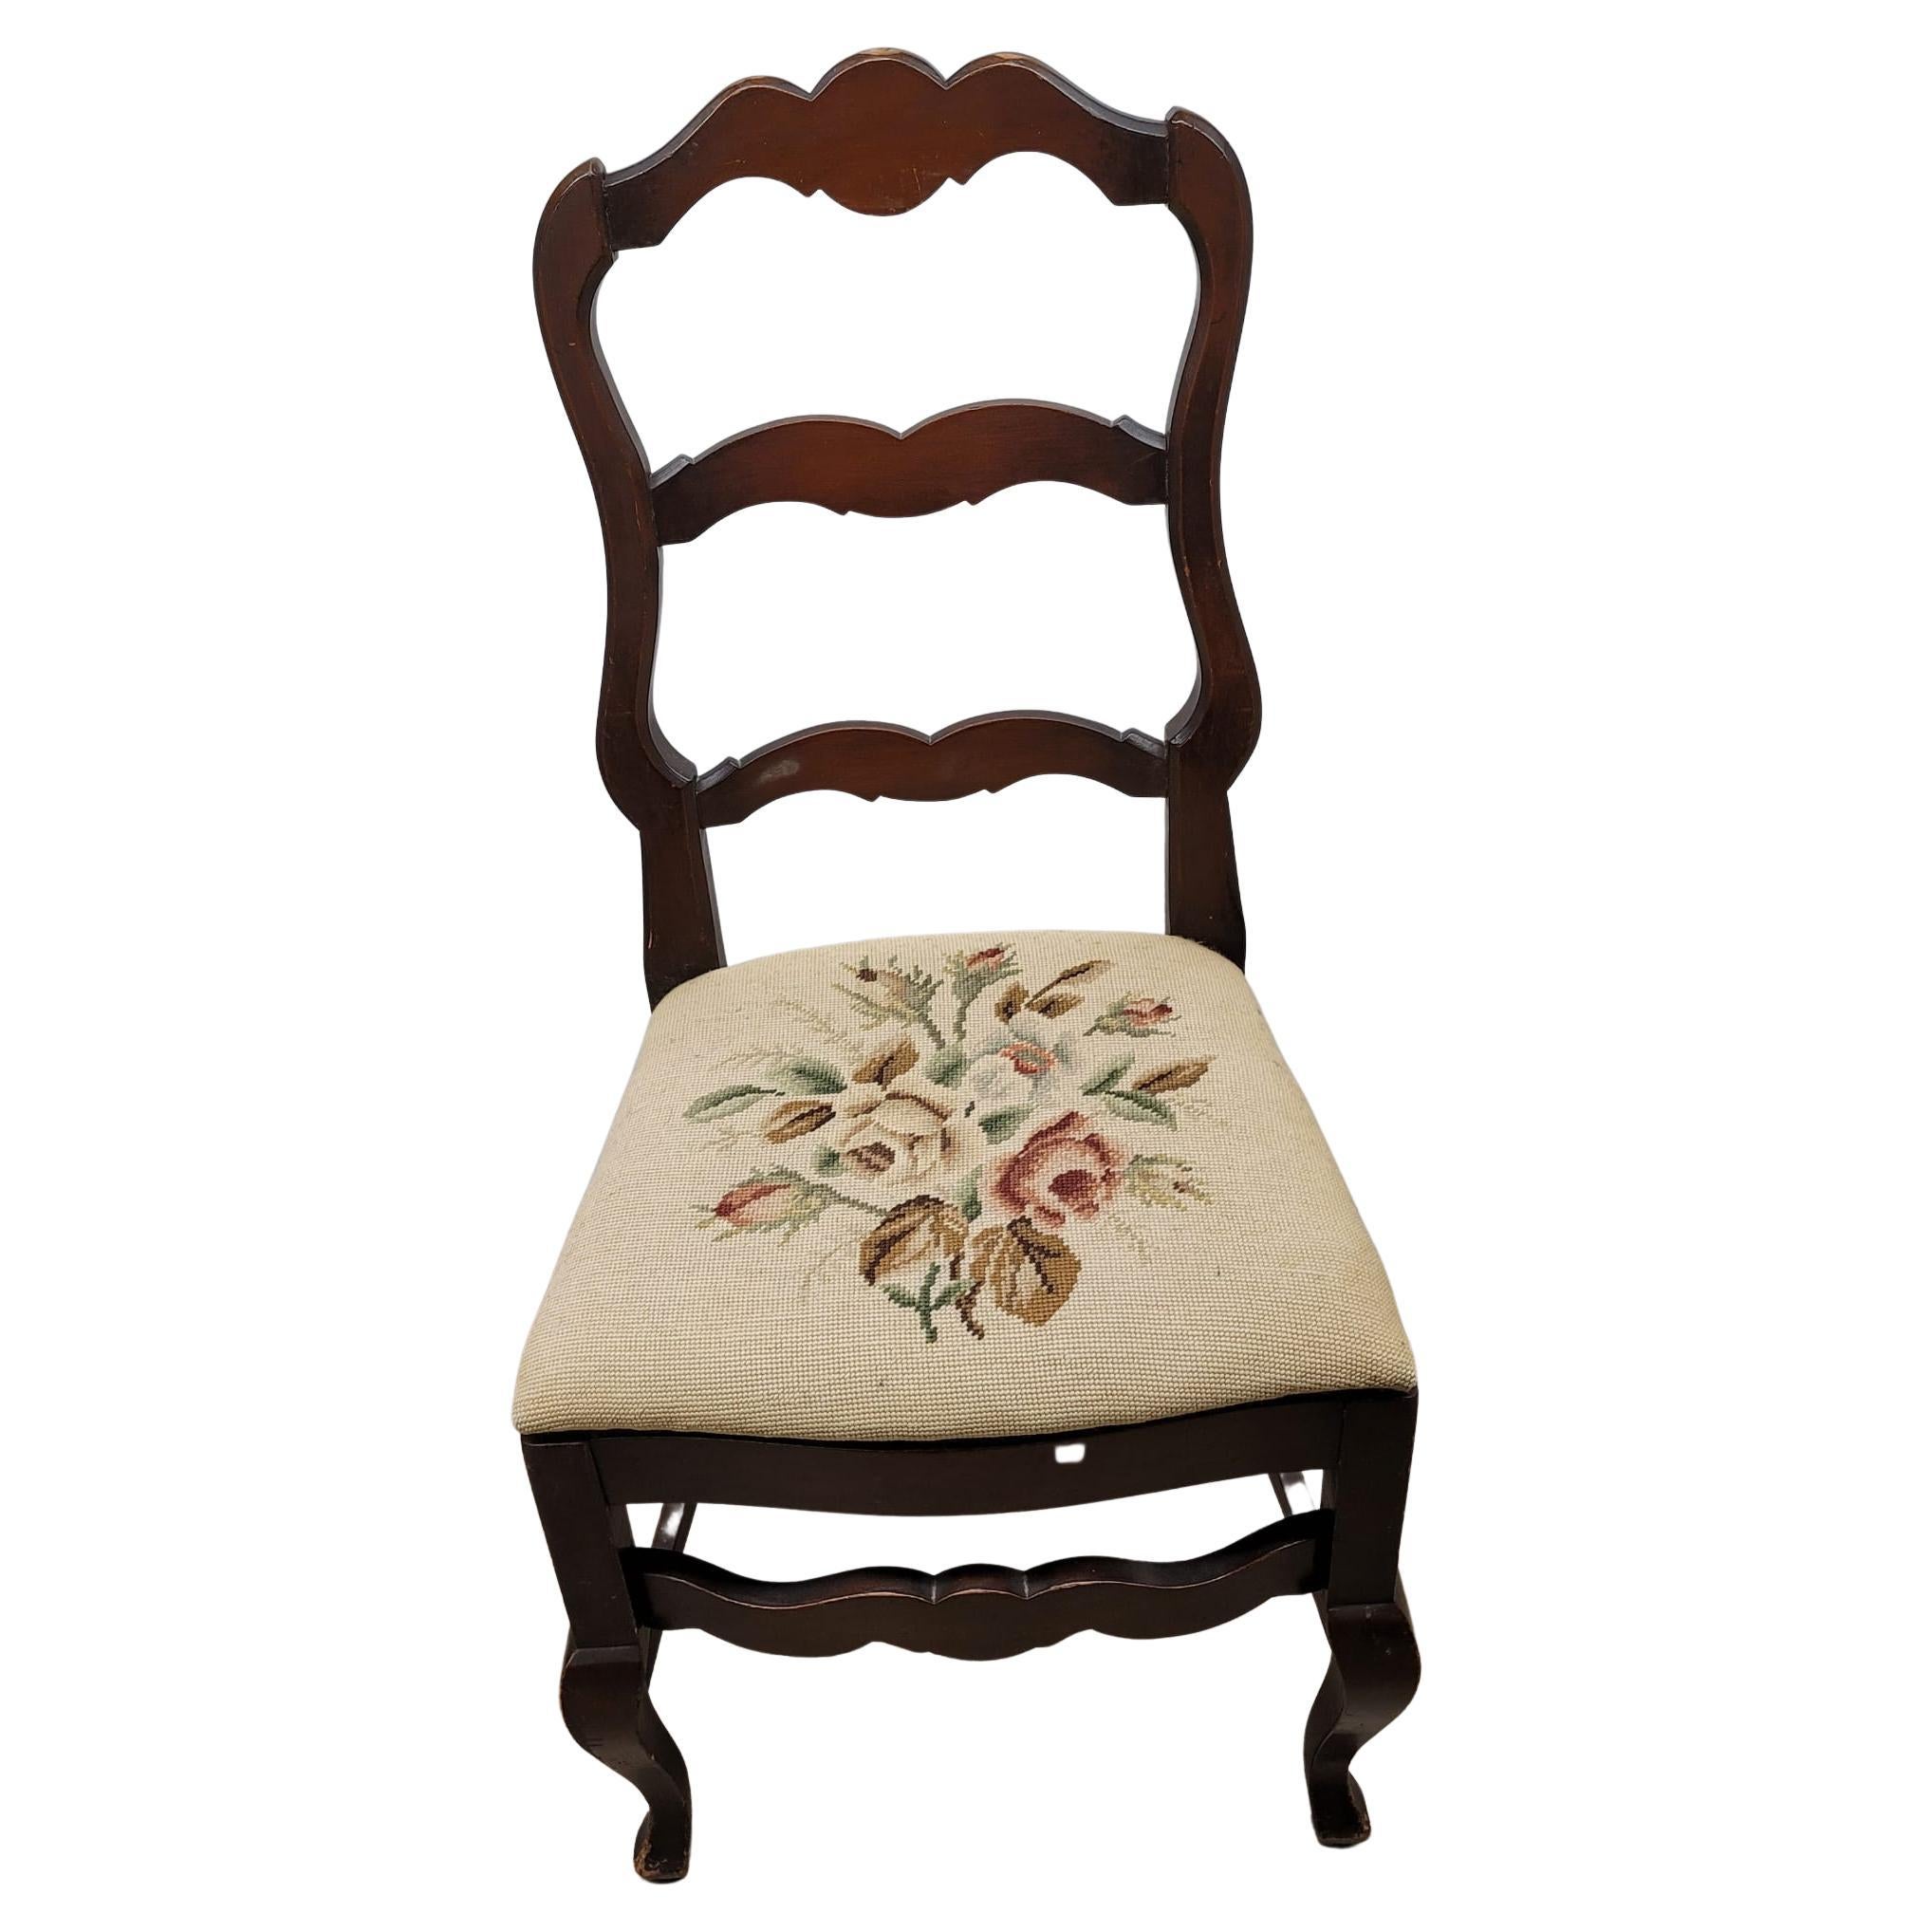 Recently needlepoint reupholstered ladder back mahogany side chair by the Reichenbach Furniture Company. Good vintage condition. Measures 19.5